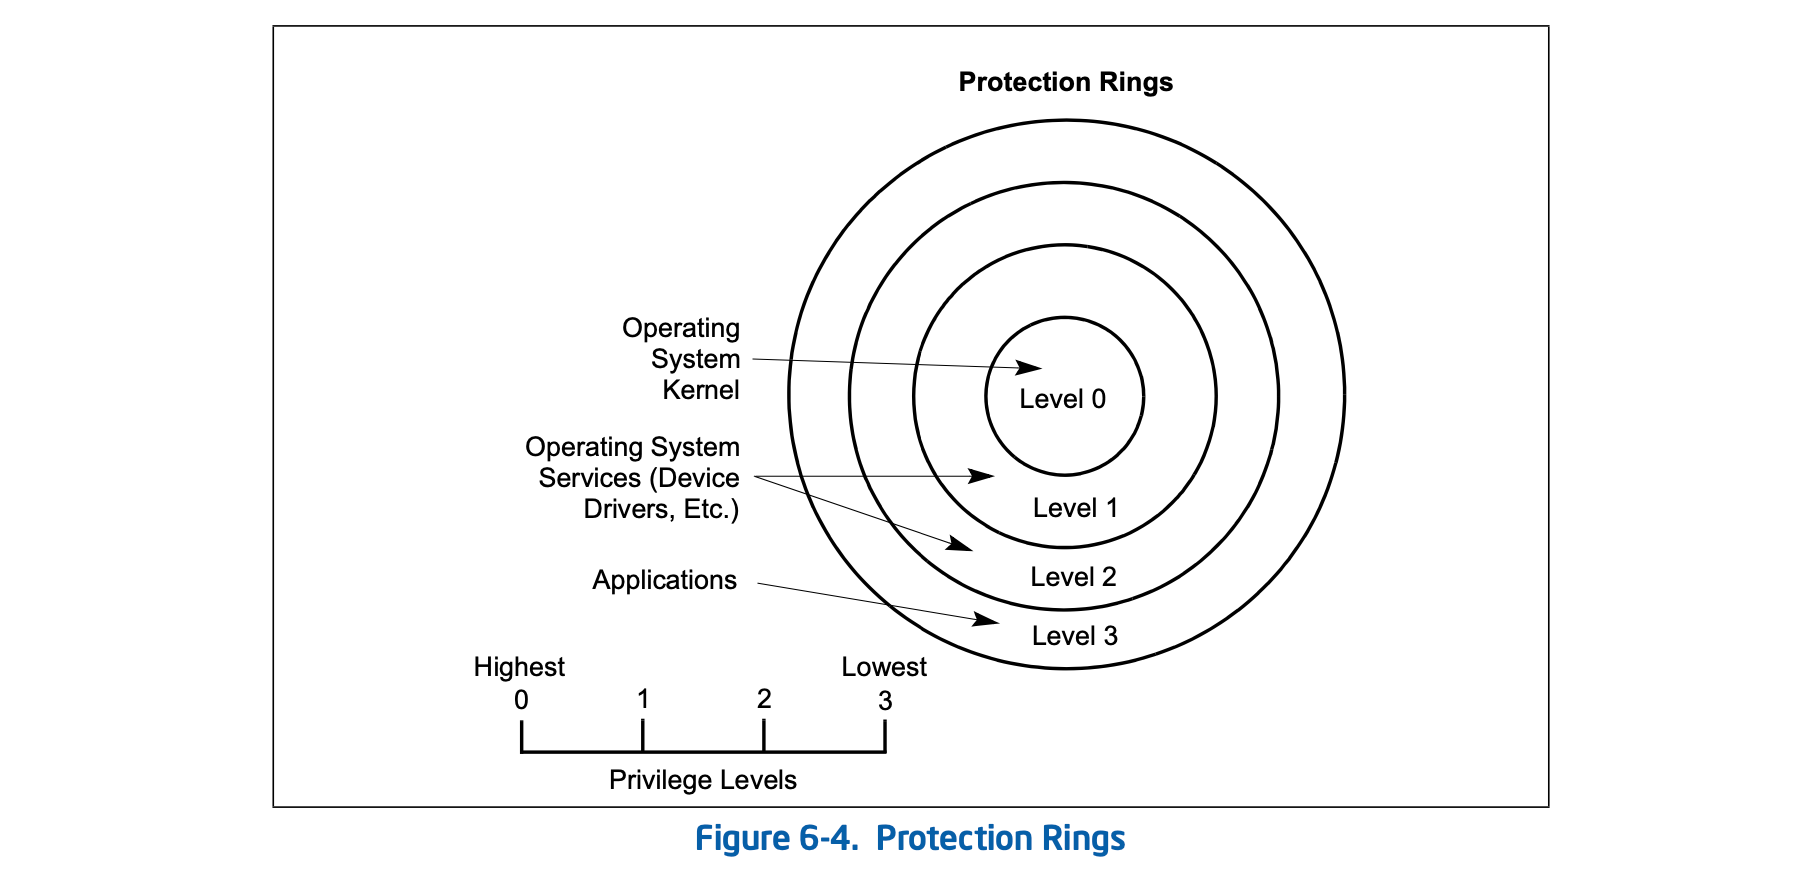 Protection rings